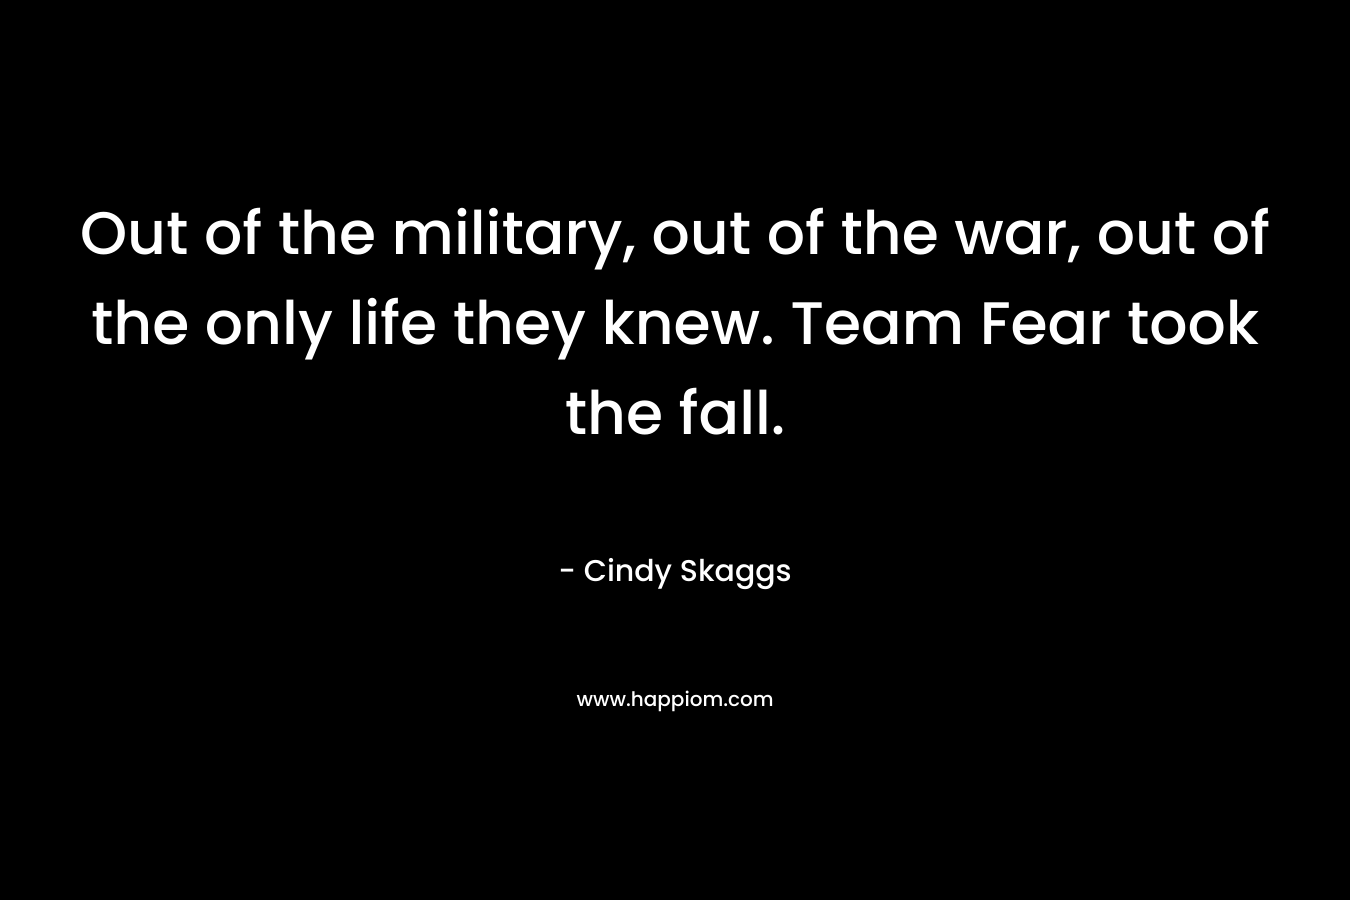 Out of the military, out of the war, out of the only life they knew. Team Fear took the fall. – Cindy Skaggs